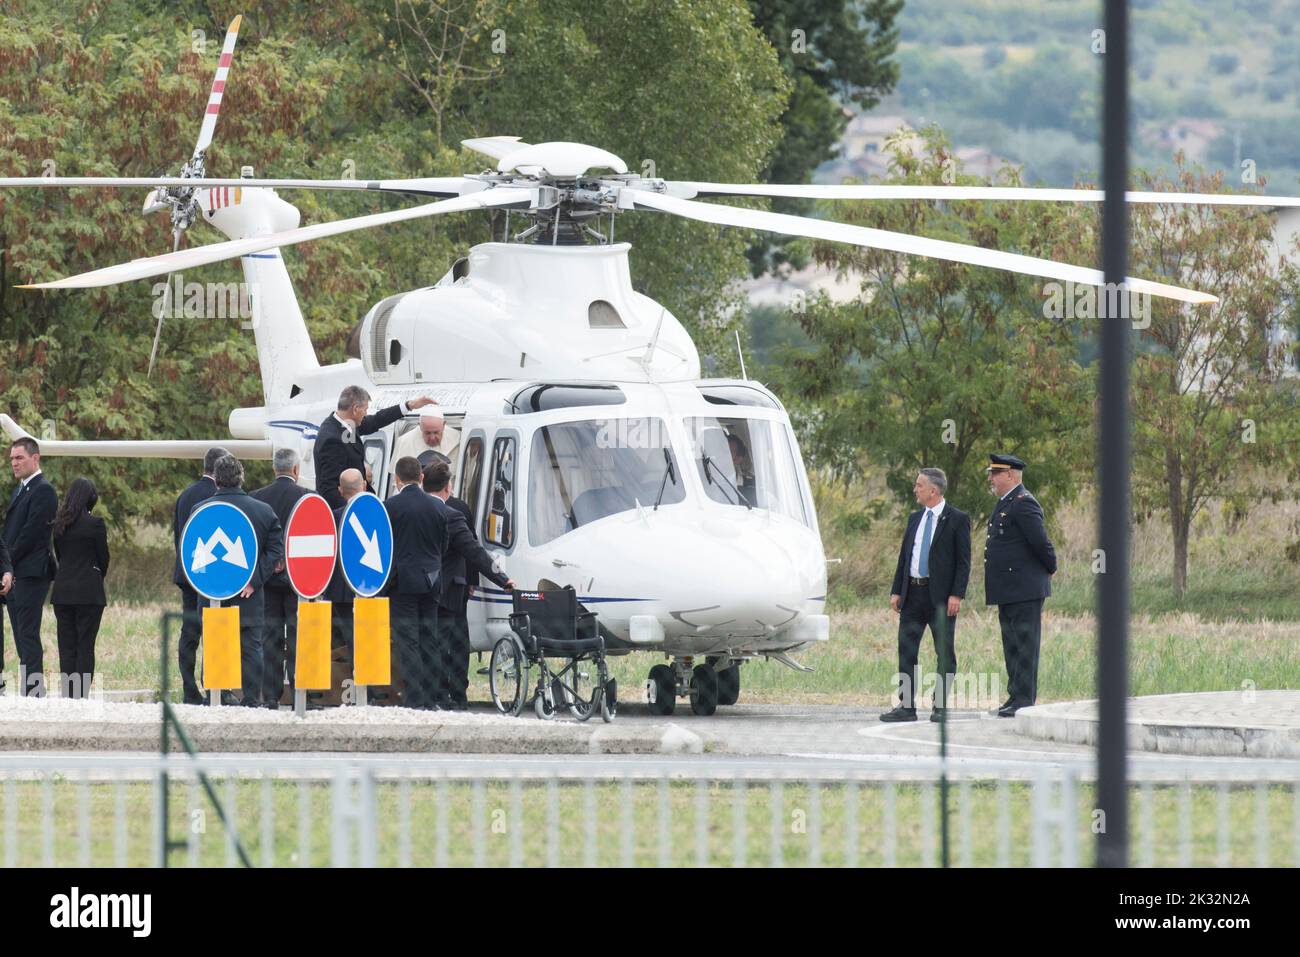 Italy, Assisi, Vatican, 22/09/24 Pope Francis, escorted by his aide Sandro Mariotti (Rear C), Vatican Security Chief, Gianluca Gauzzi Broccoletti (L) and Prefect of the Pontifical House, Monsignor Leonardo Sapienza (2ndL) arrives in a wheelchair after his helicopter landed in Assisi, central Italy, to attend the Economy of Francesco (EoF) event EoF is a process called for by the Pope to lay foundations for a new economy. Photograph by Andrea Colarieti /Catholic Press Photo. RESTRICTED TO EDITORIAL USE - NO MARKETING - NO ADVERTISING CAMPAIGNS Stock Photo